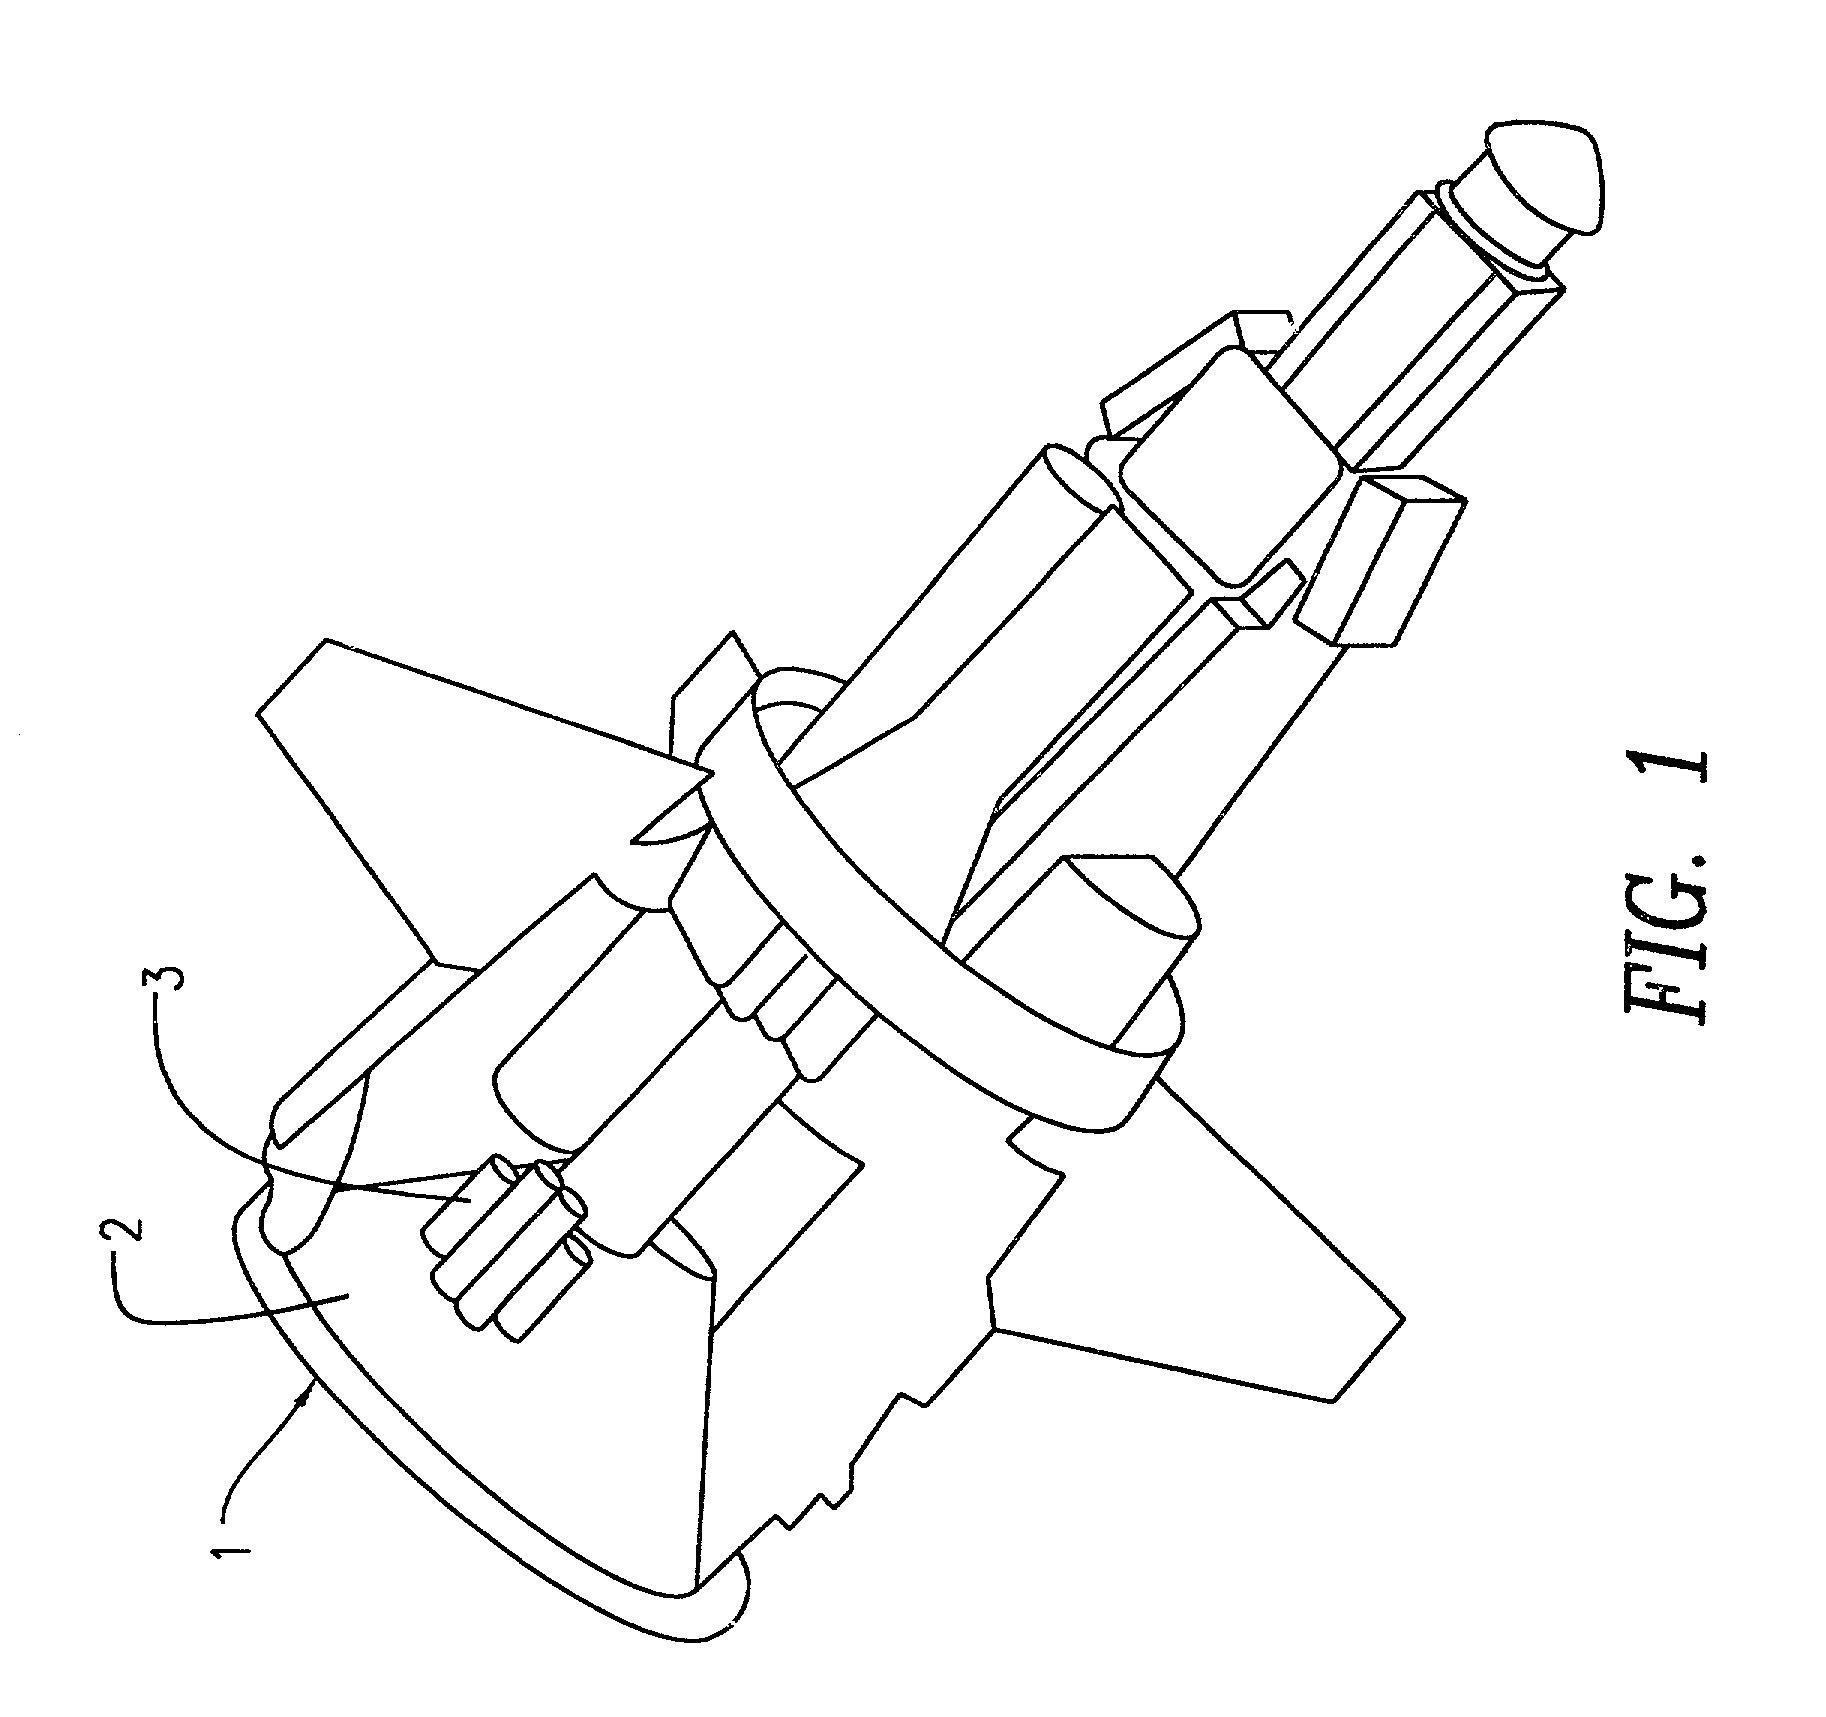 Grenade dispense mechanism for non-spin dual purpose improved conventional munitions